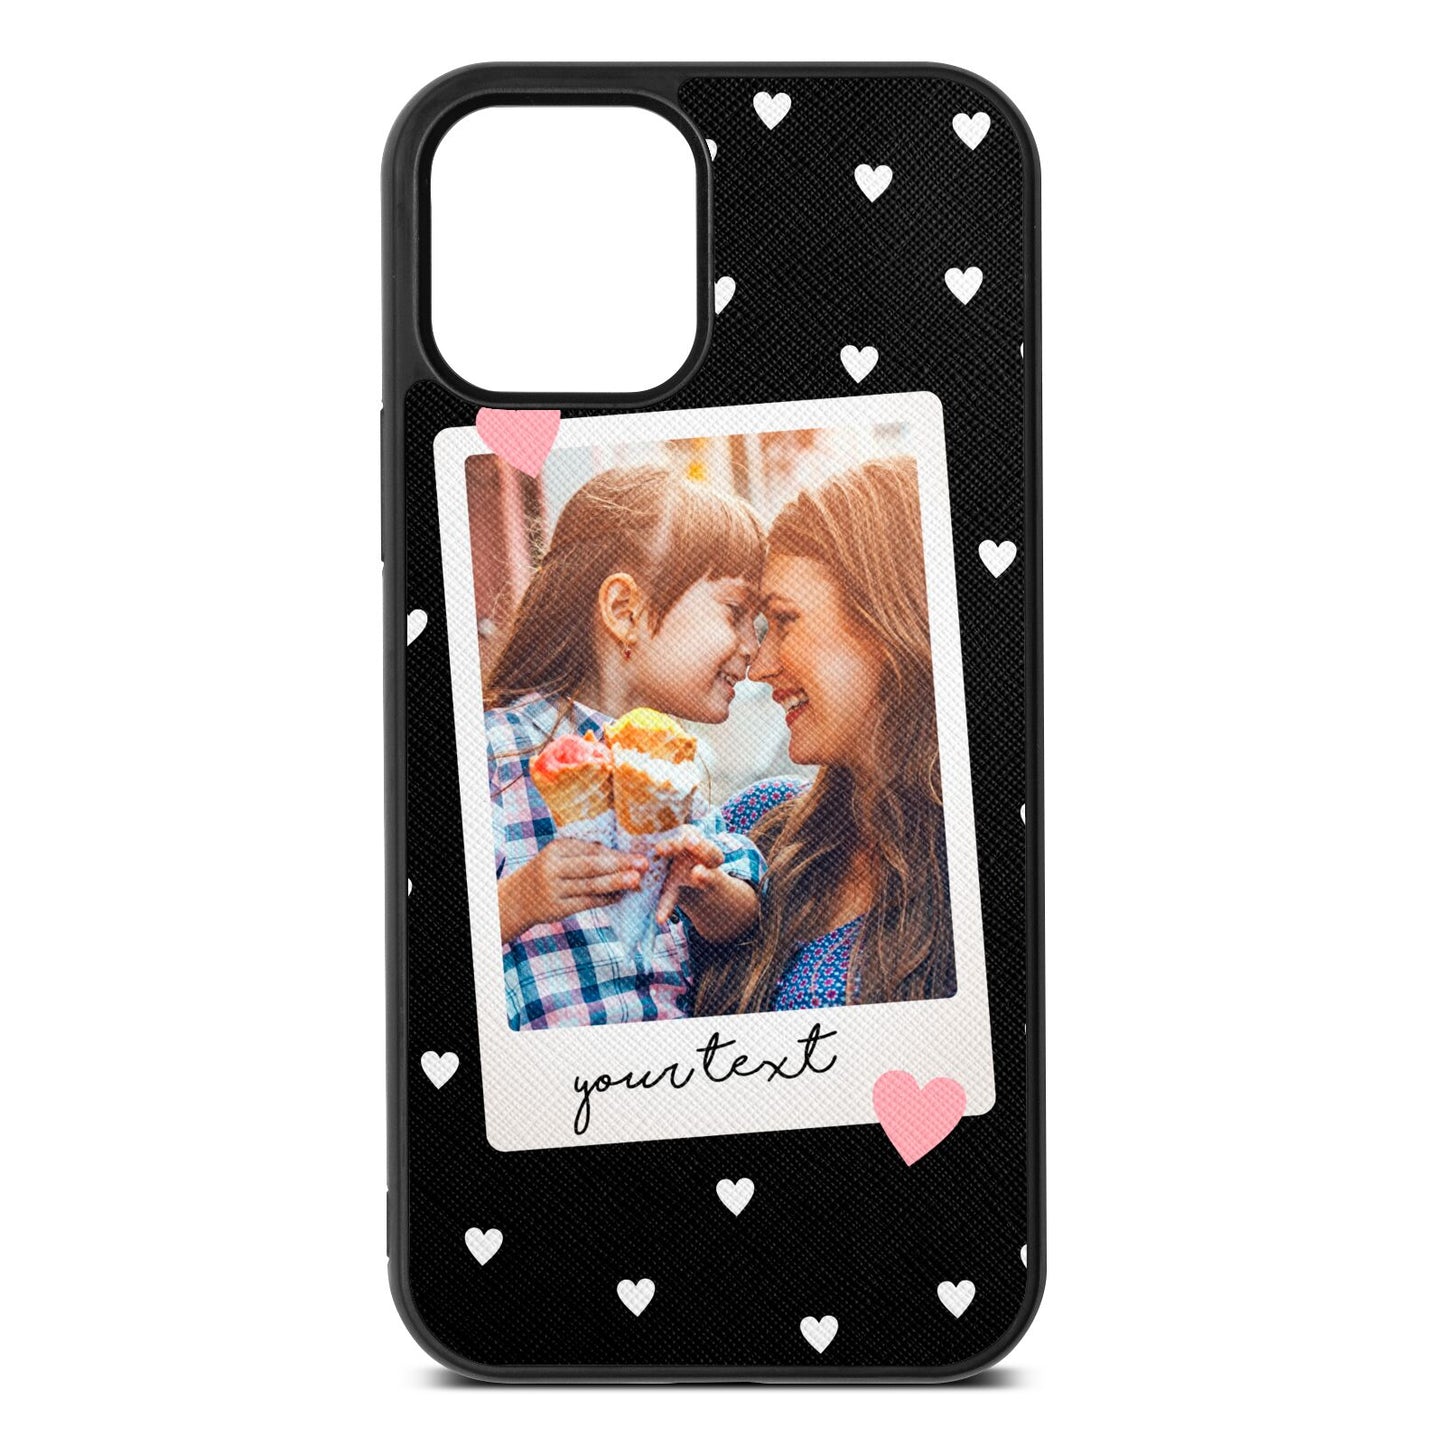 Personalised Photo Love Hearts Black Saffiano Leather iPhone 12 Case